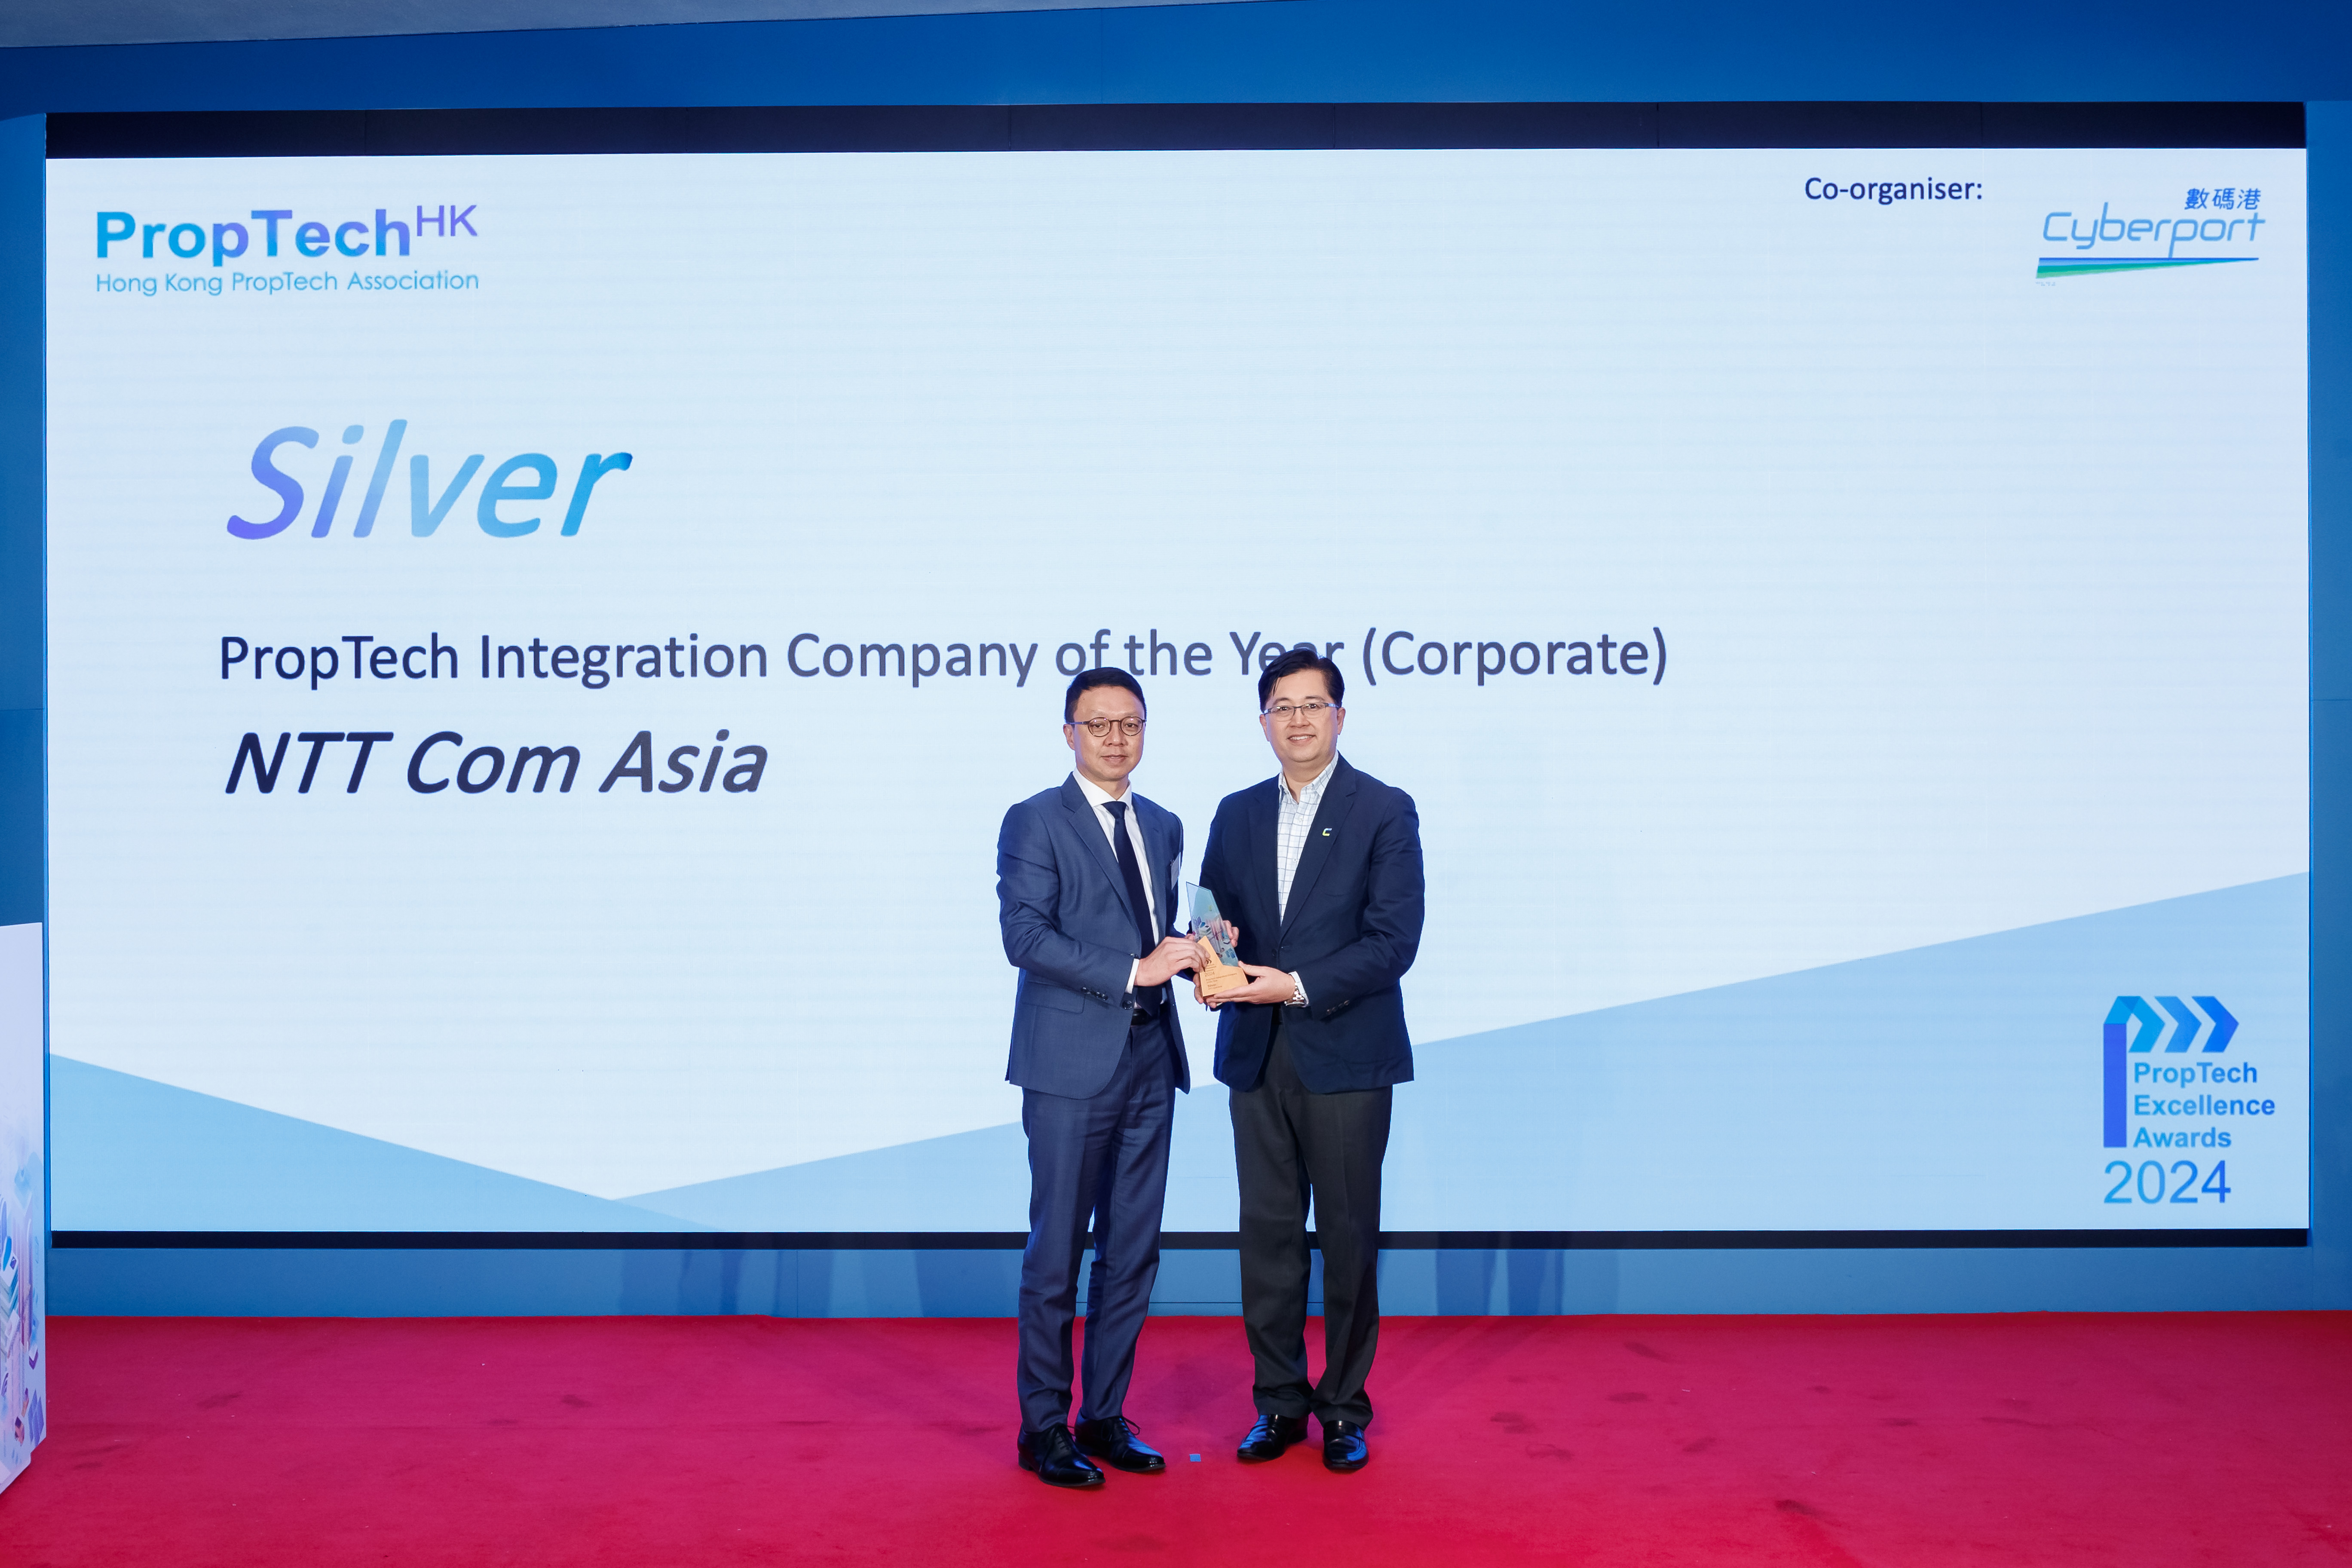 Steven So, Senior Vice President, Data Centre Hong Kong, NTT Com Asia, receives the trophies at the Award Presentation Ceremony of PropTech Excellence Awards 2024.